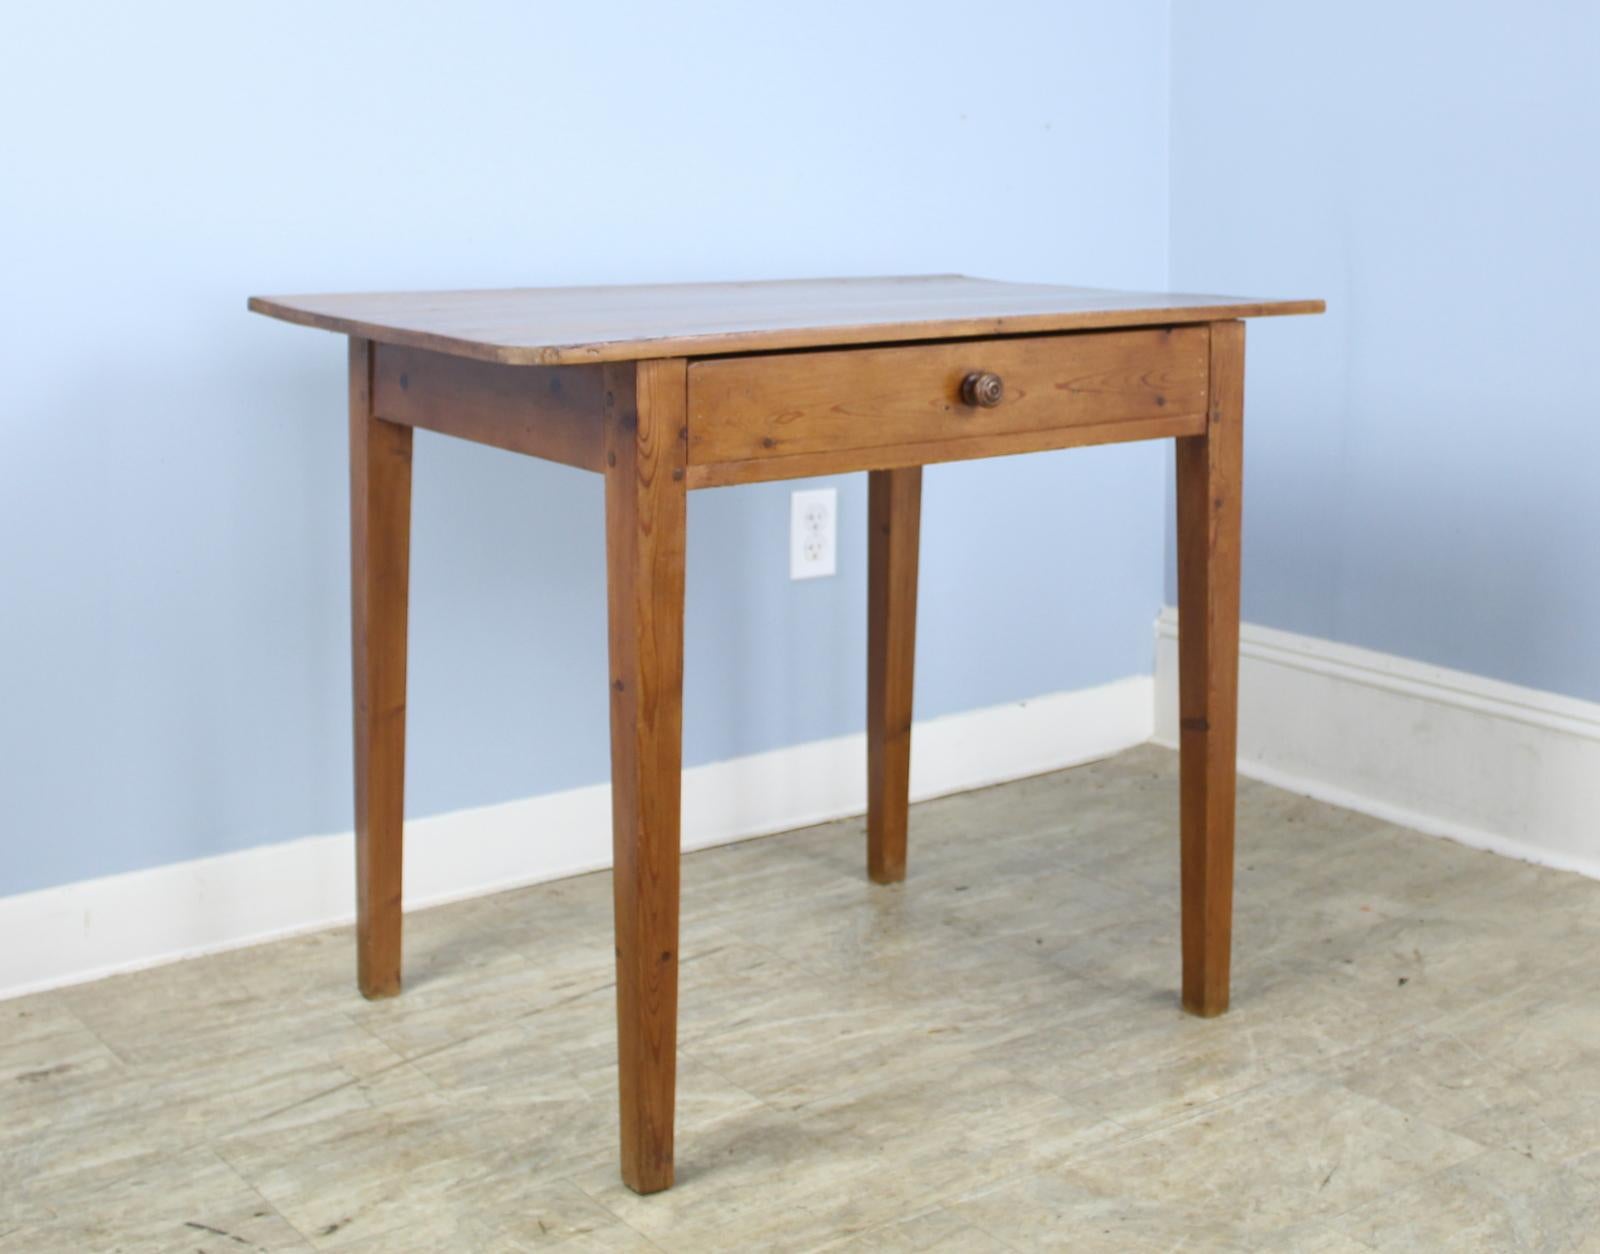 An elegant pine side table or small writing table with nice grain and patina. Classic tapered legs and a wide center drawer. Divided space in the drawer makes for good organizing. 24 inch apron height is good for knees.